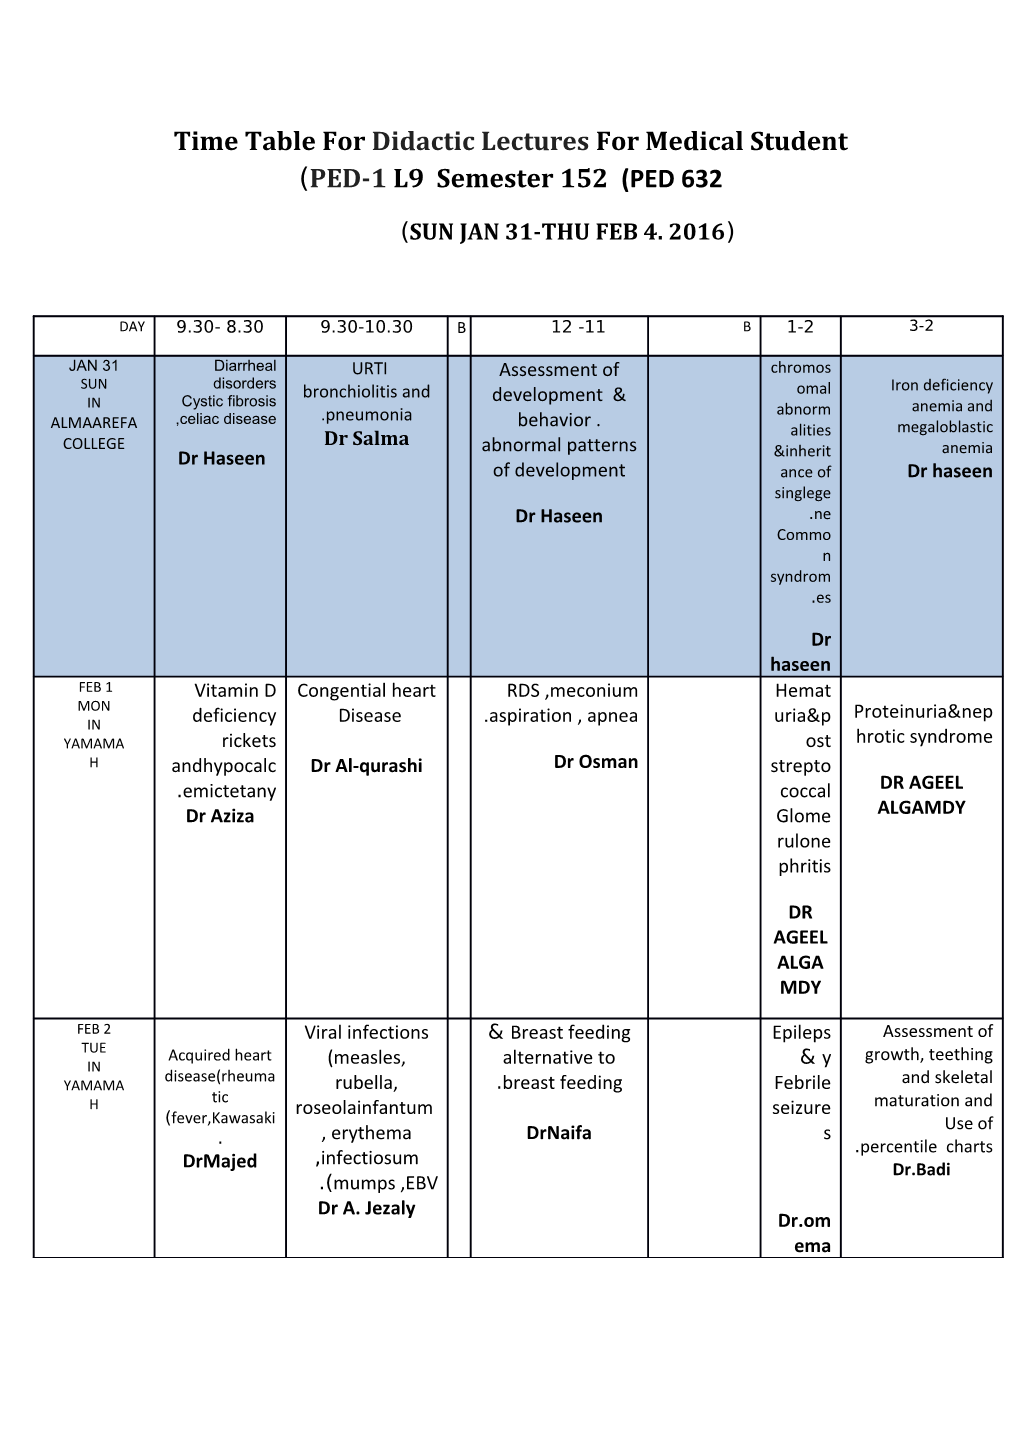 Time Table for Didactic Lecturesfor Medical Student PED-1 L9 Semester 152 (PED 632)